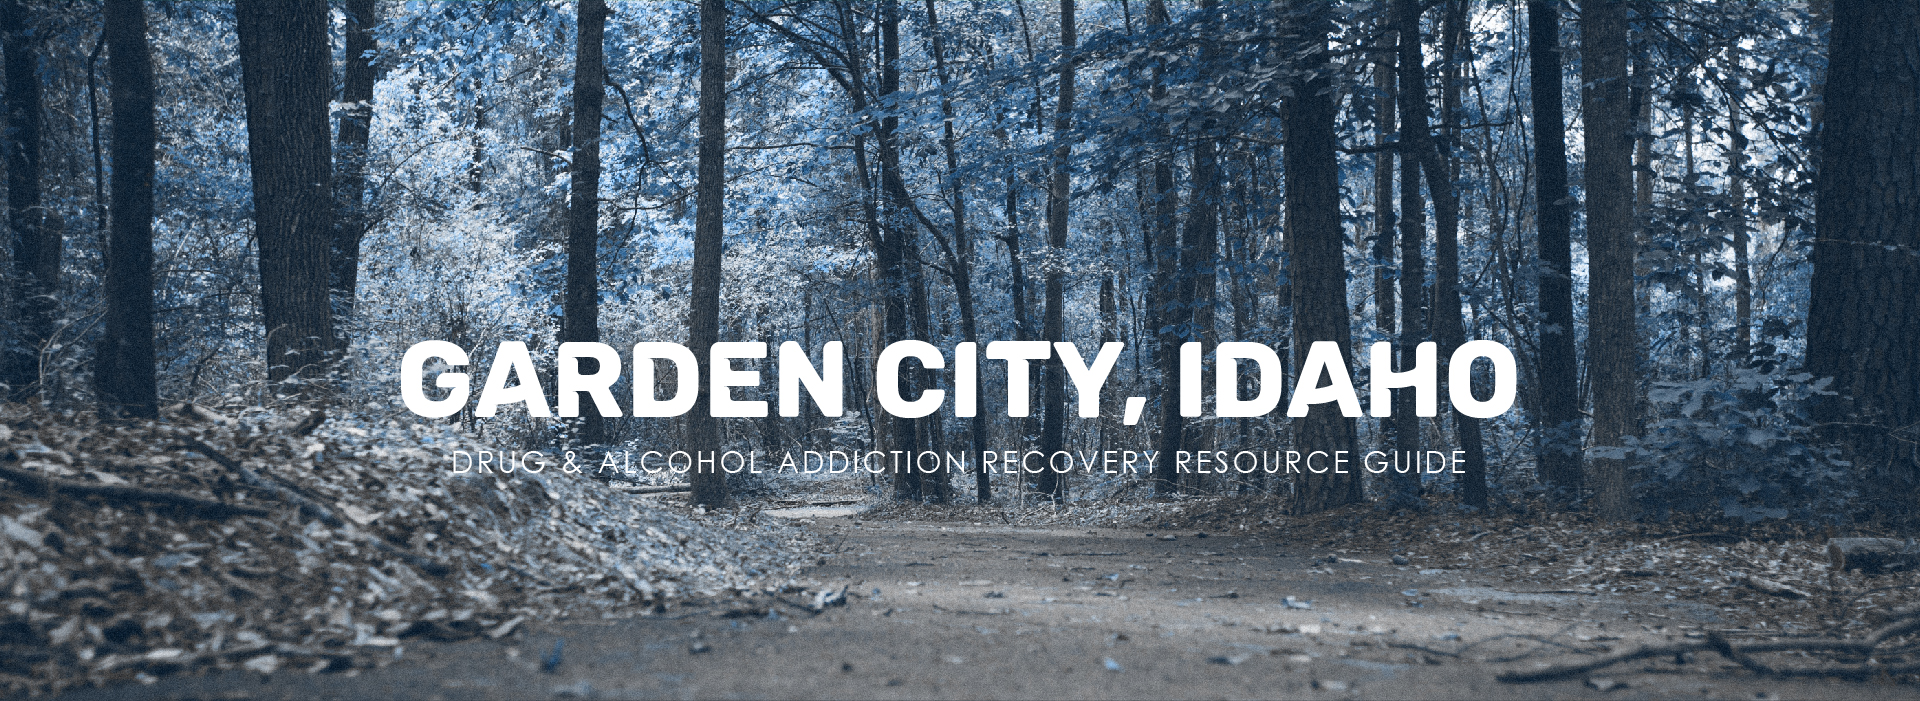 Garden City, Idaho, drug and alcohol addiction recovery resource guide